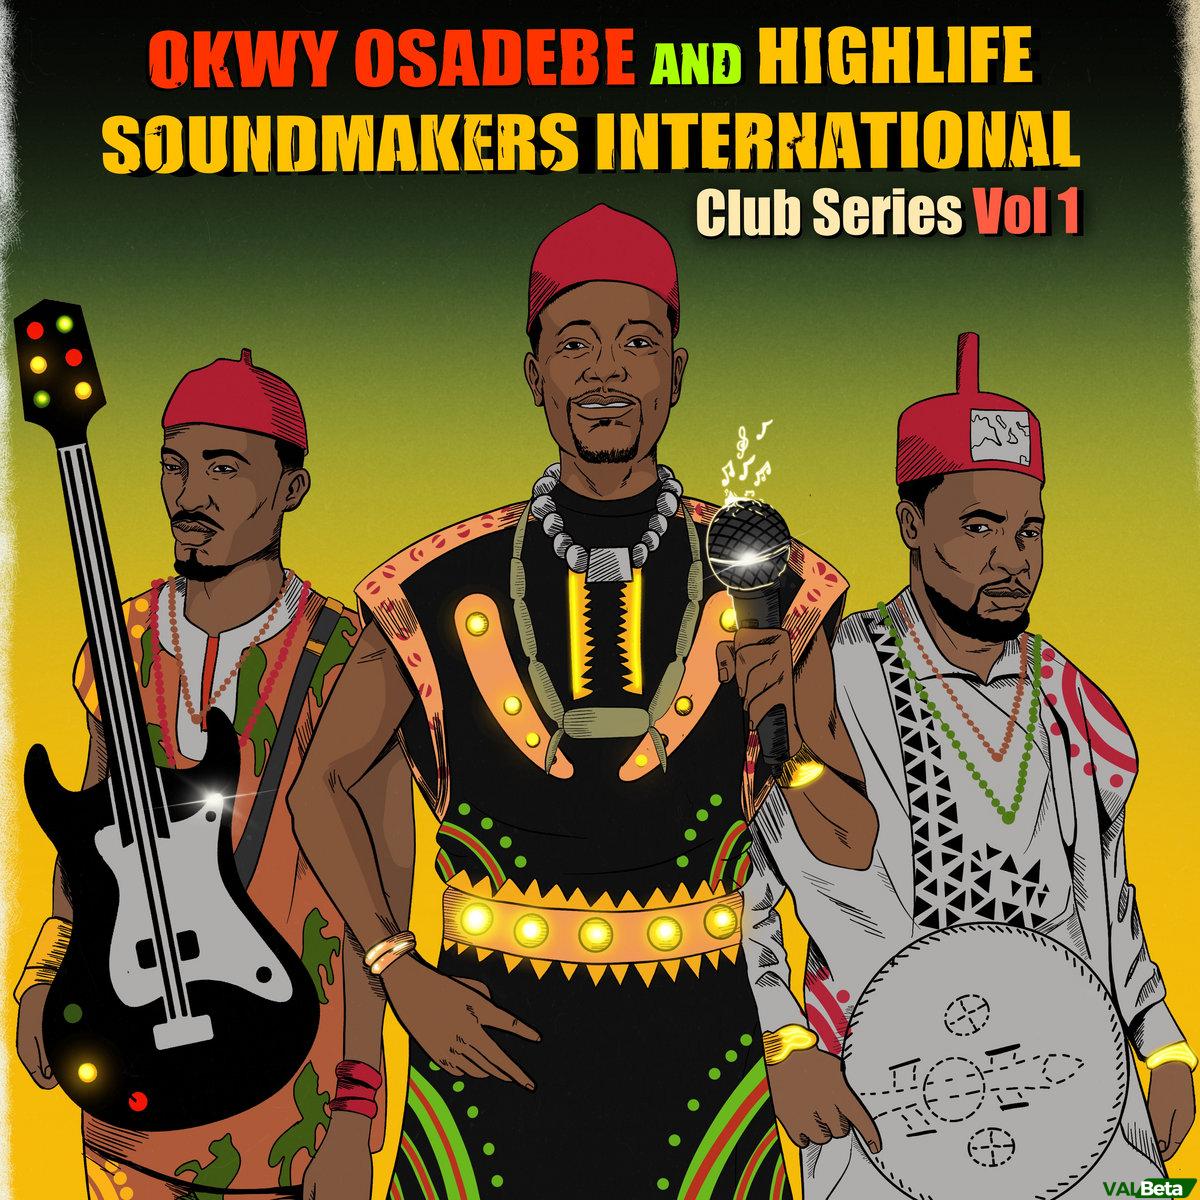 Let Discuss Top 10 Classic Highlife Music Igbo Tracks in Nigeria